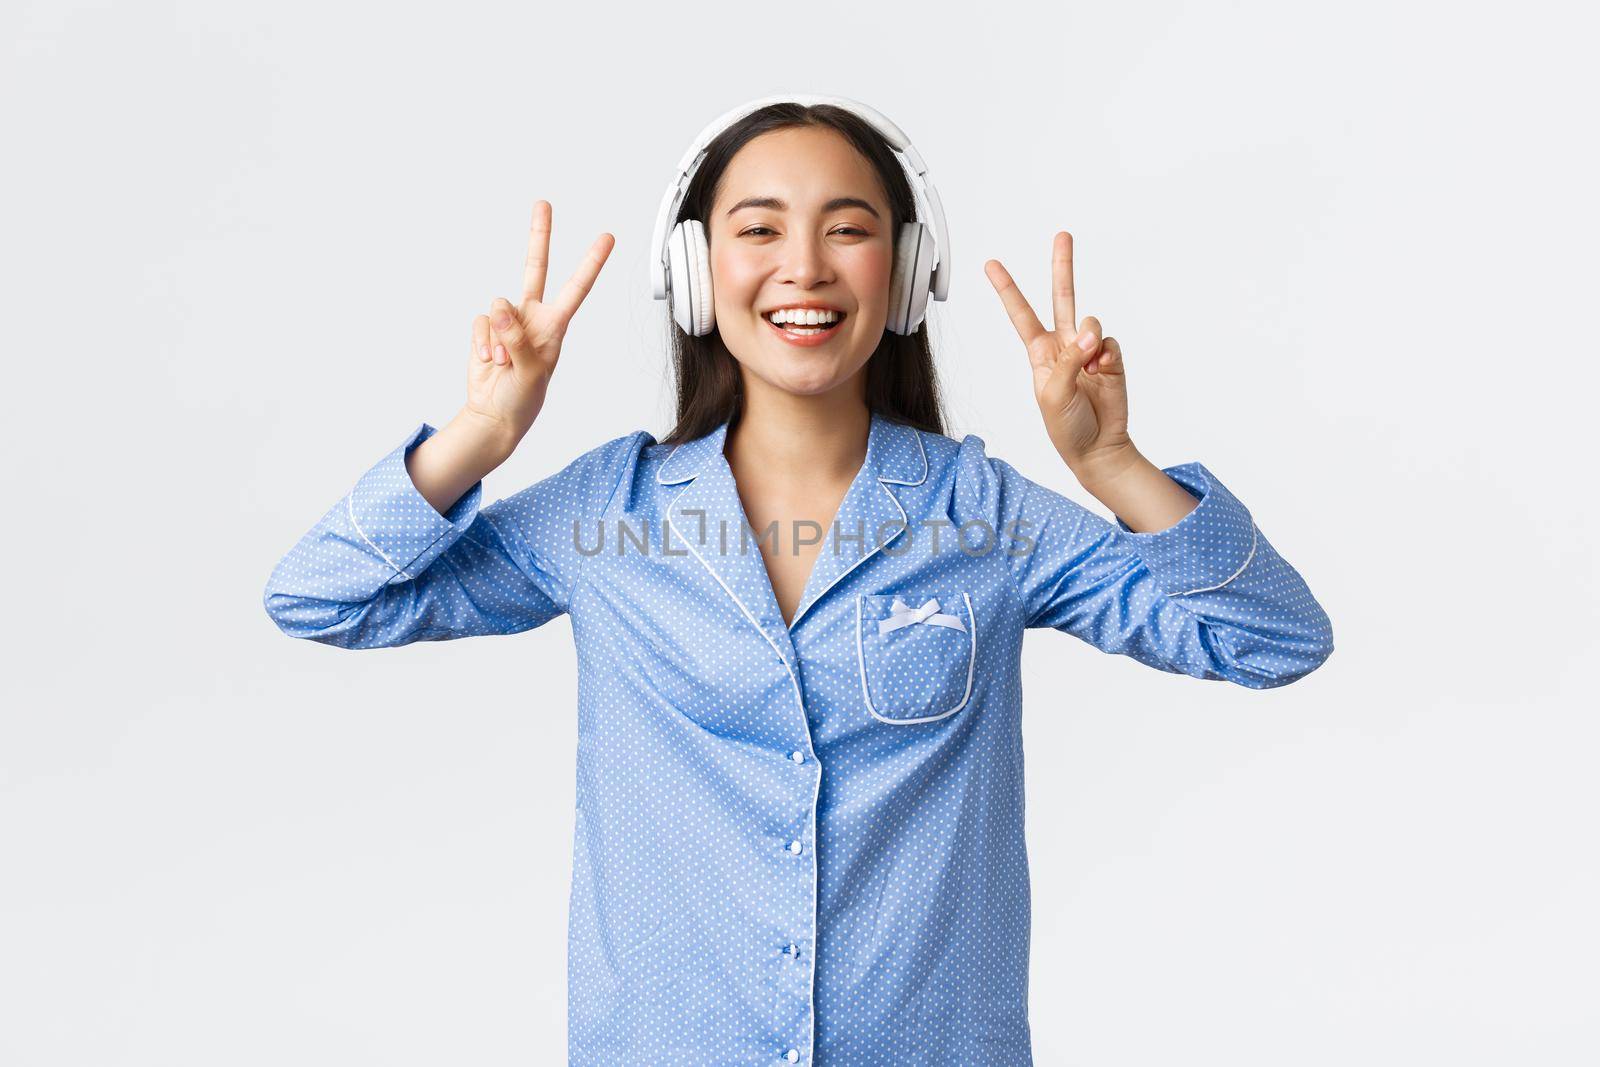 Home leisure, weekends and lifestyle concept. Kawaii asian girl in pajama listening music in wireless headphones and showing peace gesture with broad happy smile, white background.